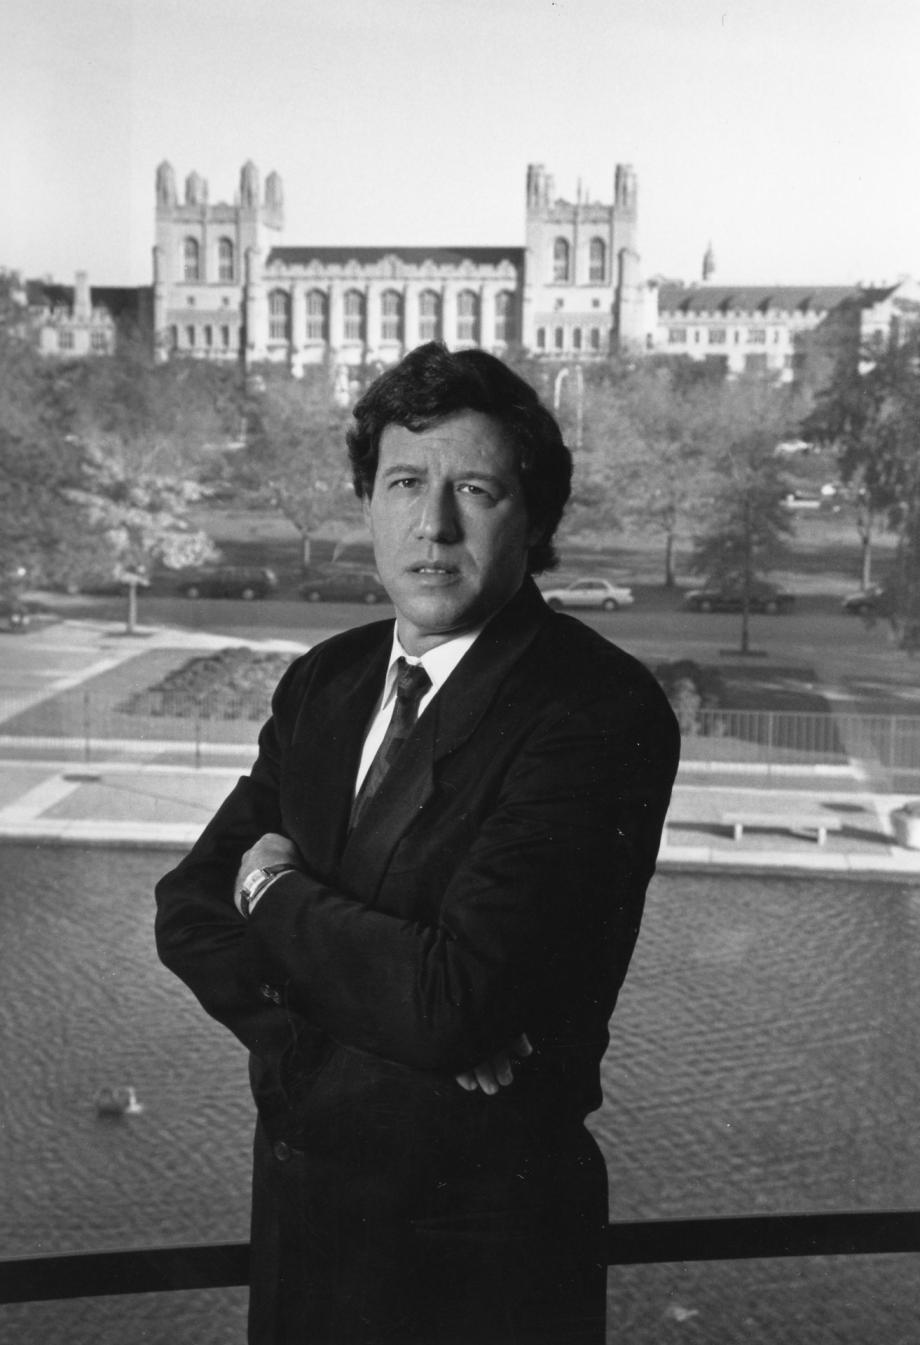 Stone in suit stares at the camera with campus buildings behind him.